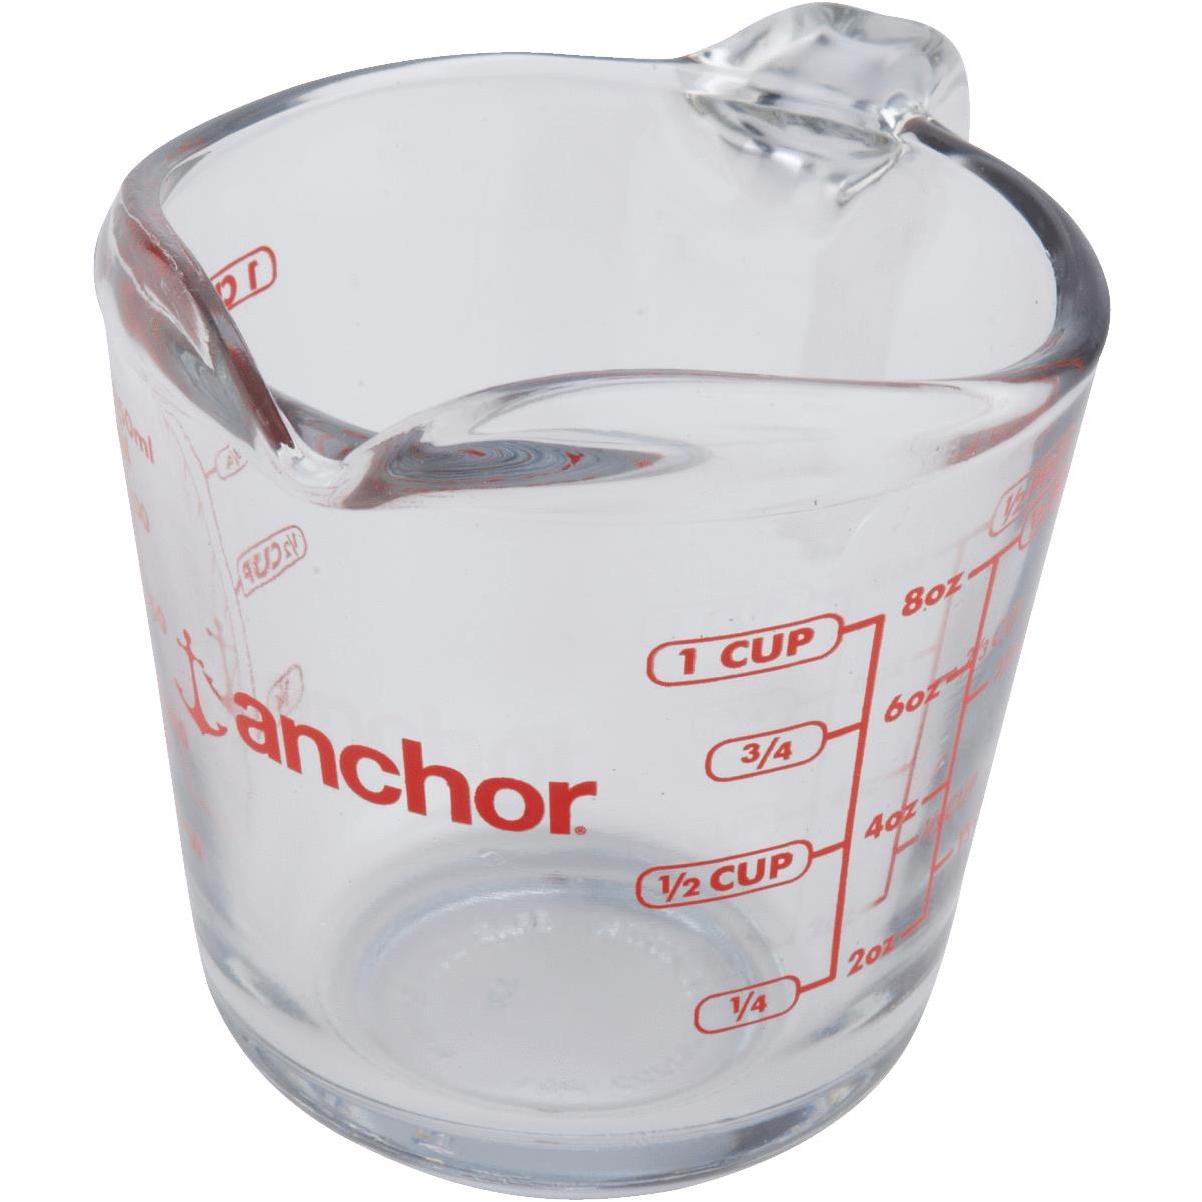 Pyrex, Clear Prepware Red Measurements, Set of 1 2-Cup, 2.6